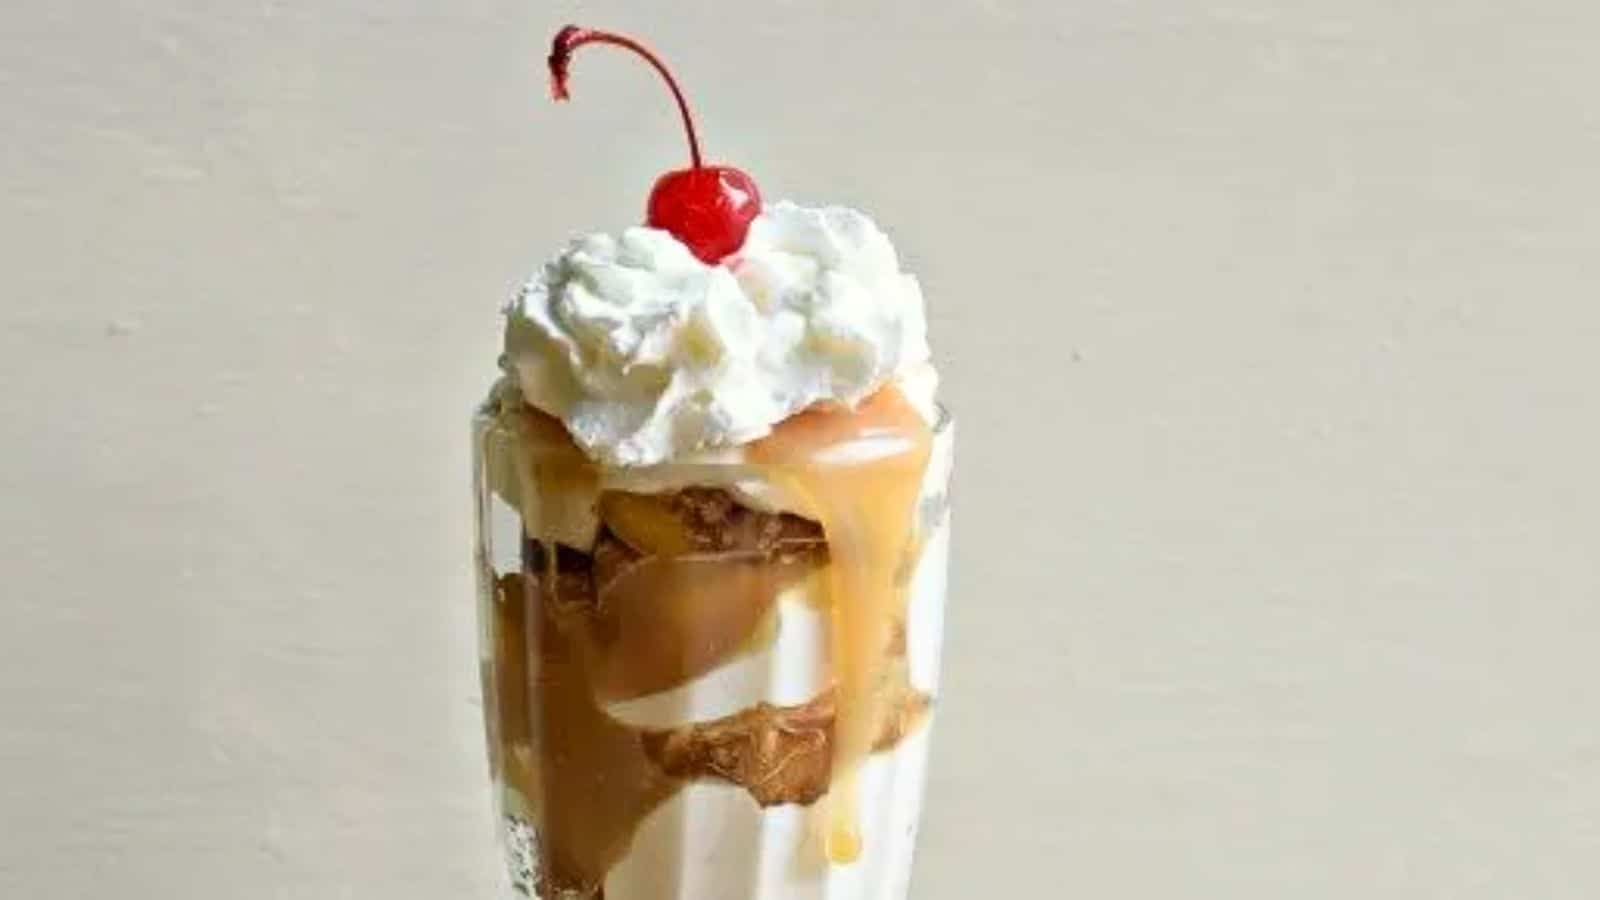 Image shows a close up of an Apple Pie Parfait in a milkshake glass topped with whipped cream and a cherry.